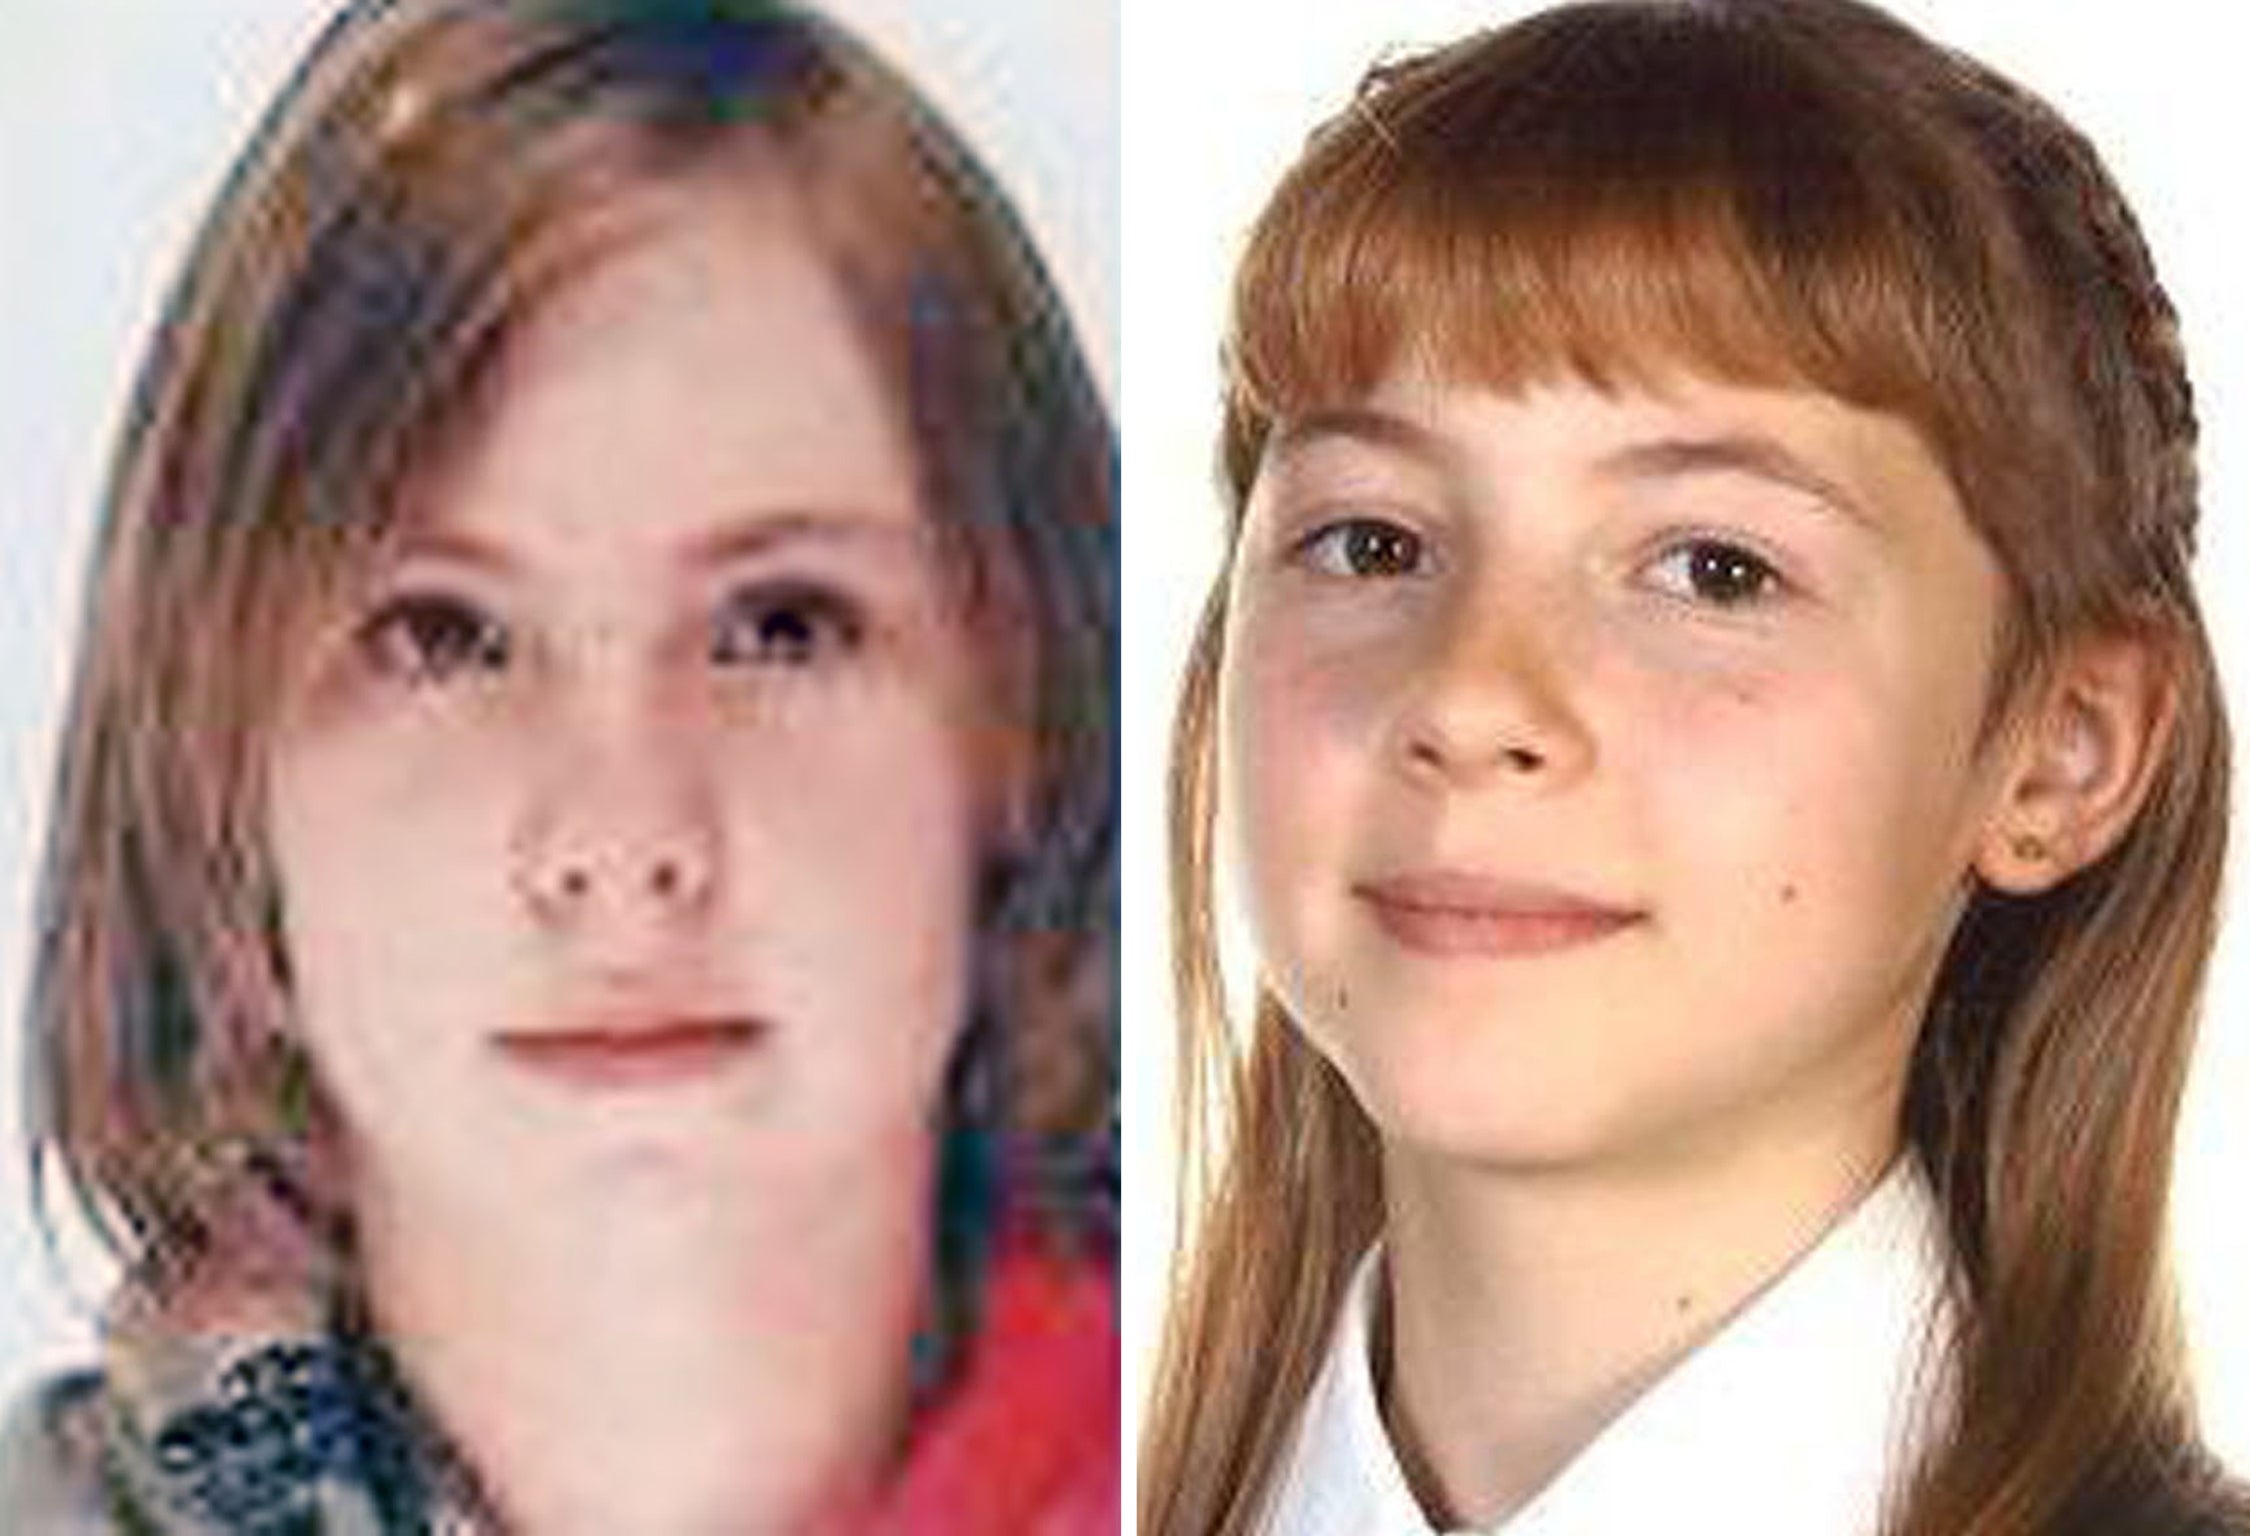 Police are searching for Wiktoria Popiel (left) and Vitalija Sidlauskaite (right) who were reported missing after a walk to a local bus stop in north London